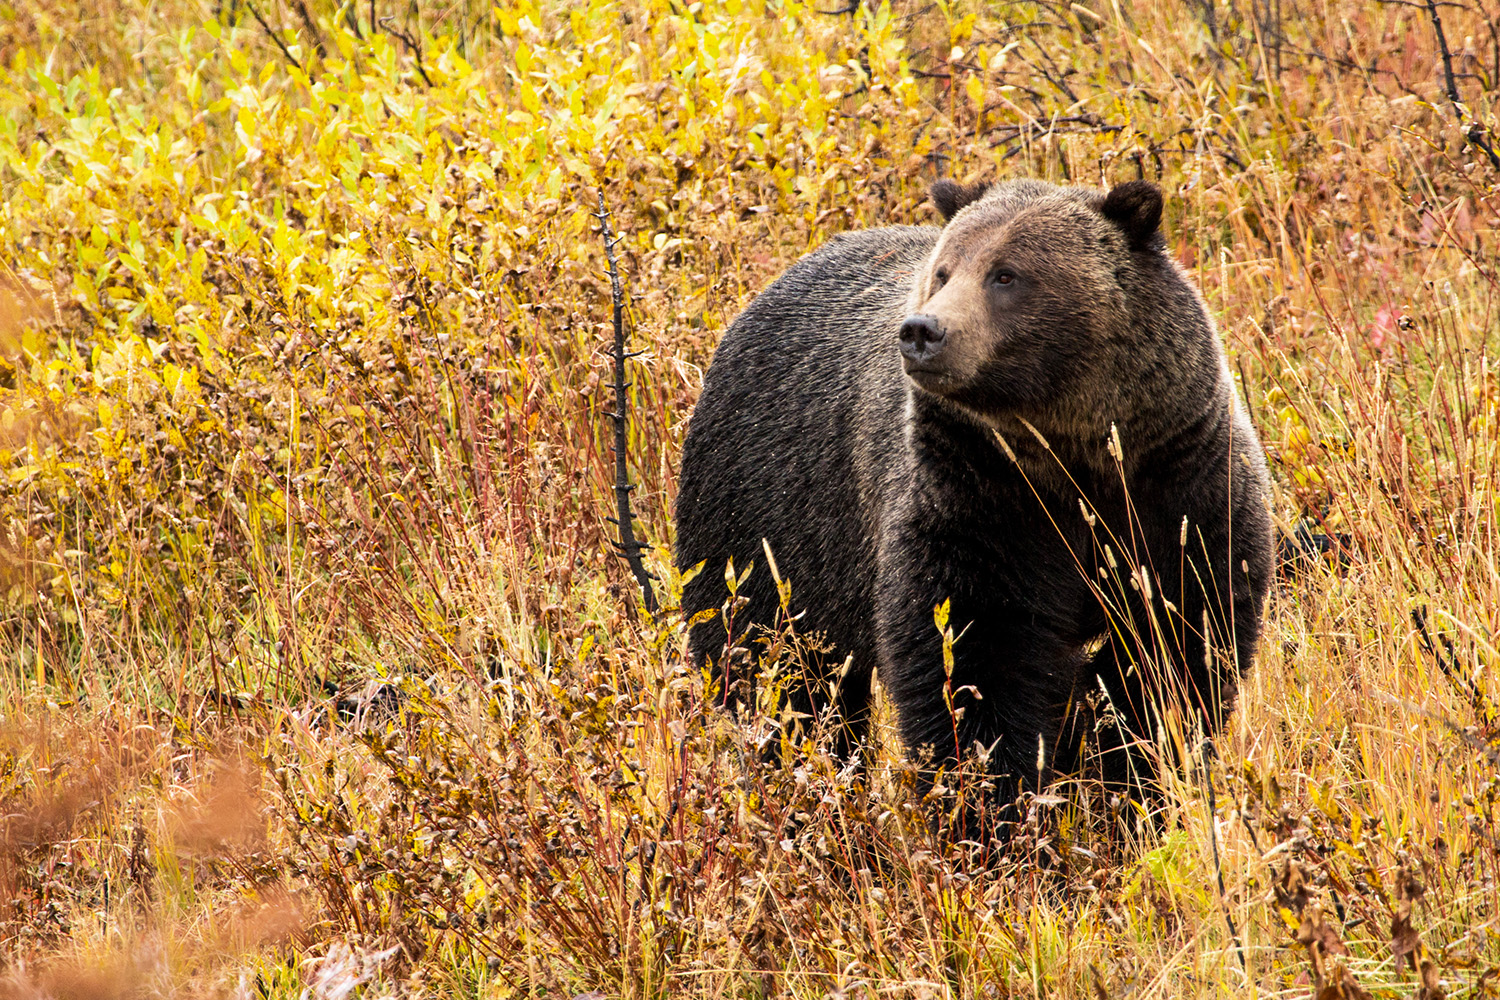 grizzly-bear-in-fall-leaves-grand-teton-national-park-photo-credit-nps-adams